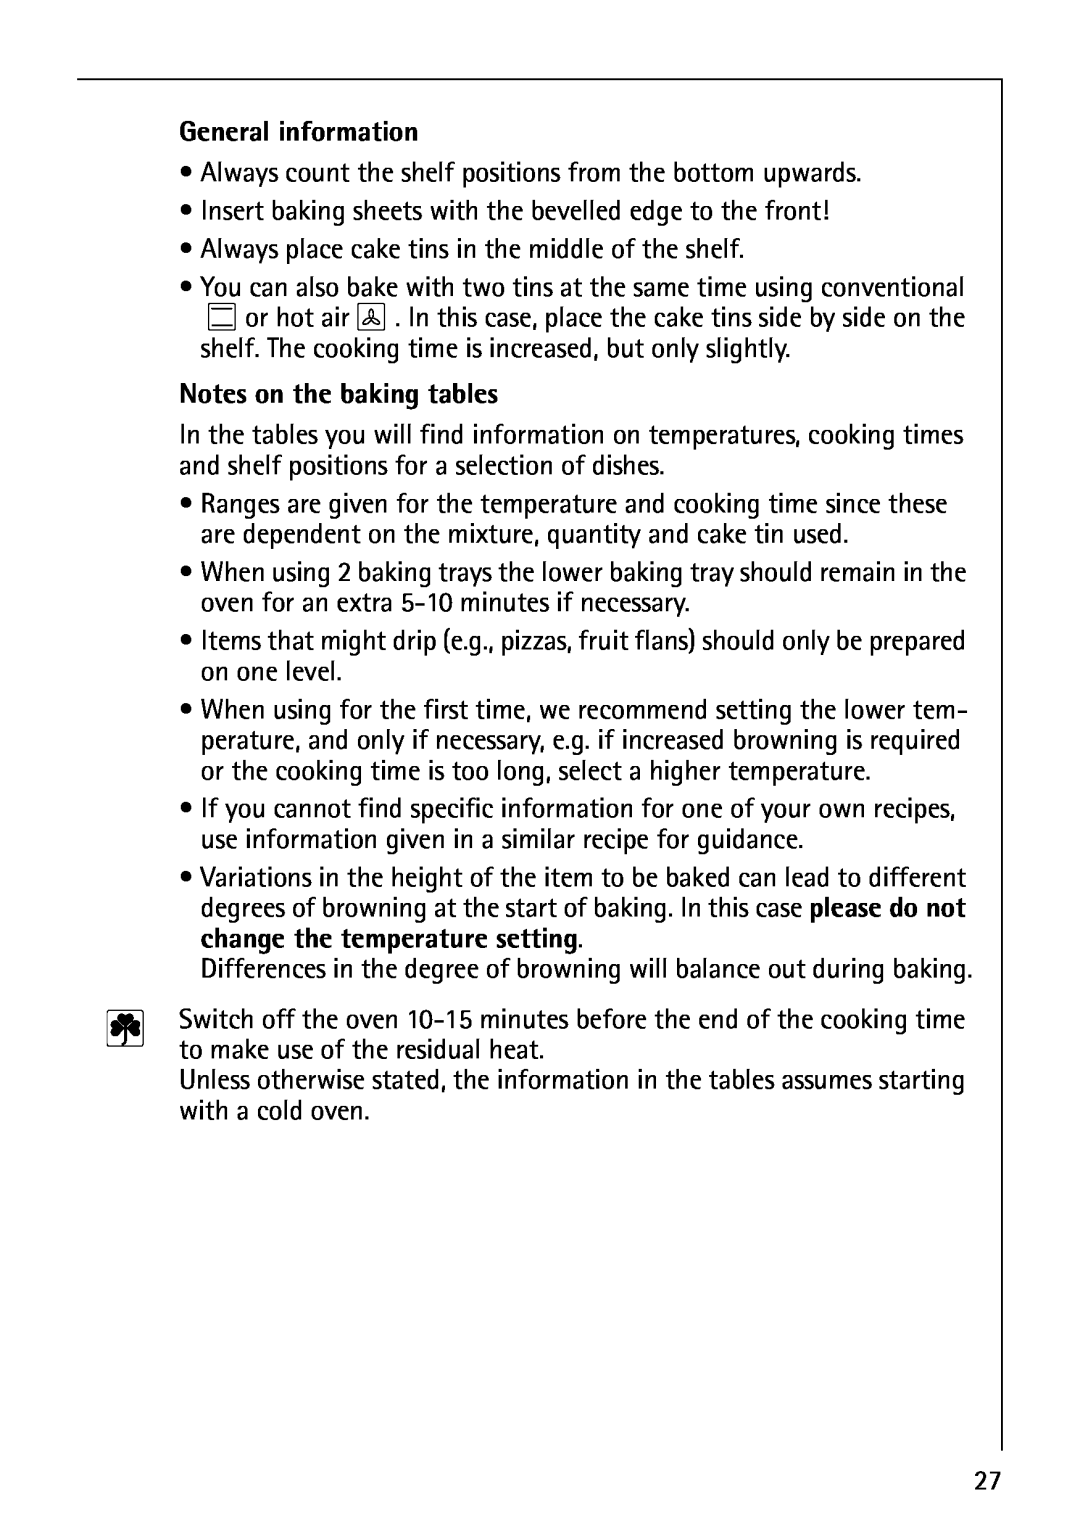 AEG E3100-1 manual General information, Notes on the baking tables 